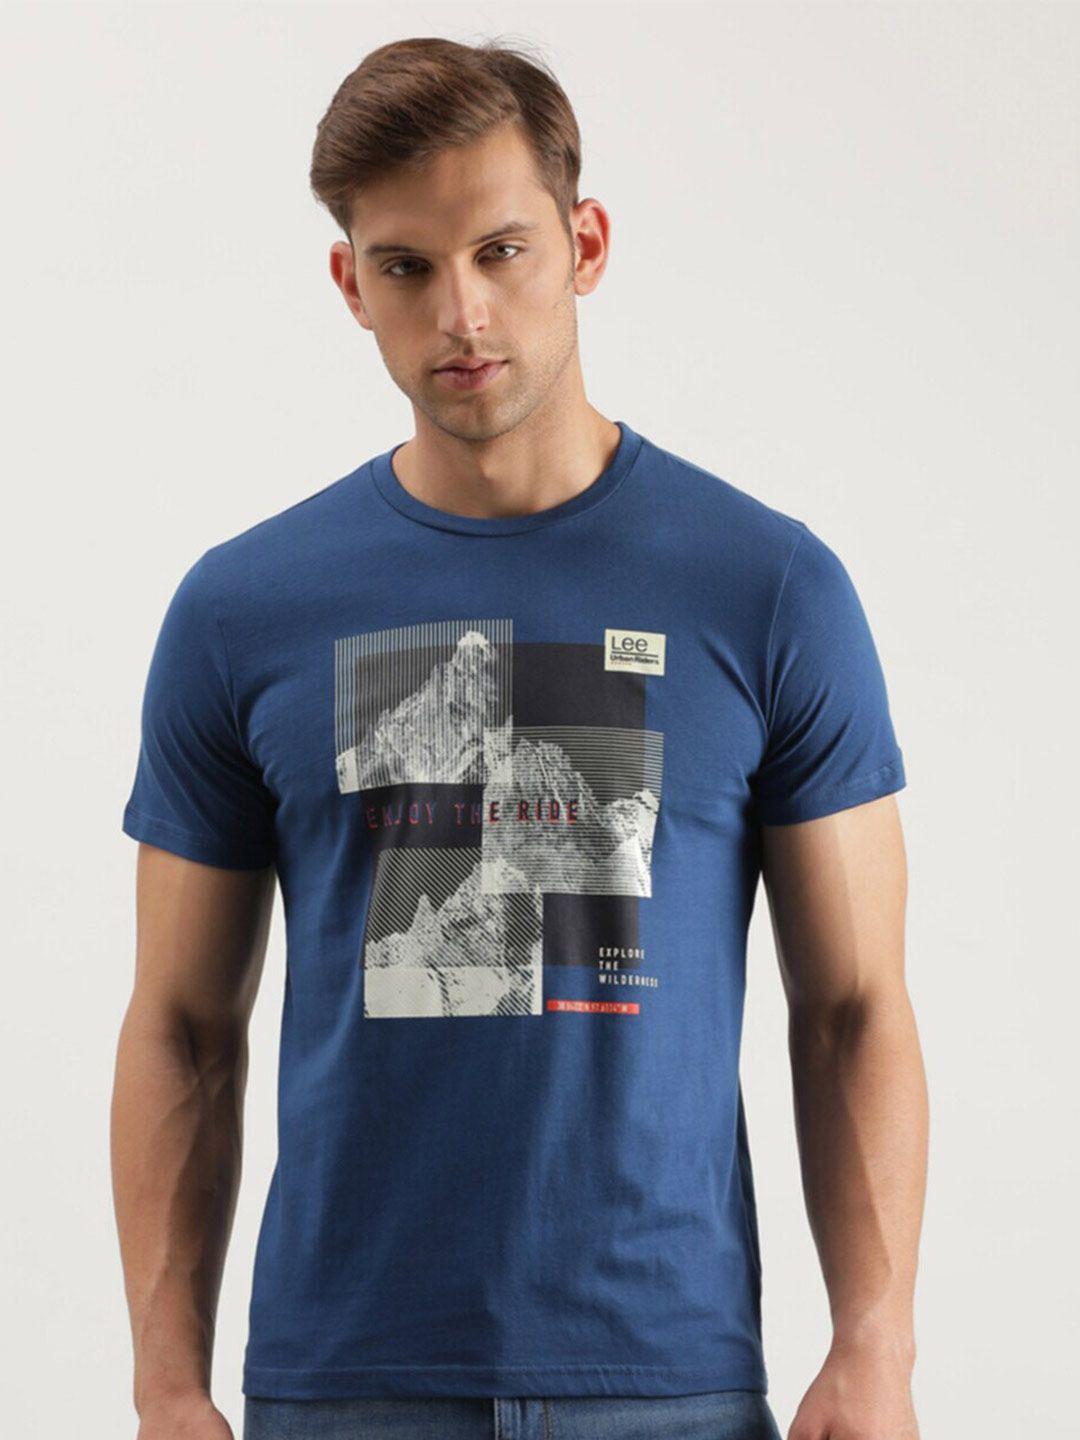 lee graphic printed slim fit cotton t-shirt